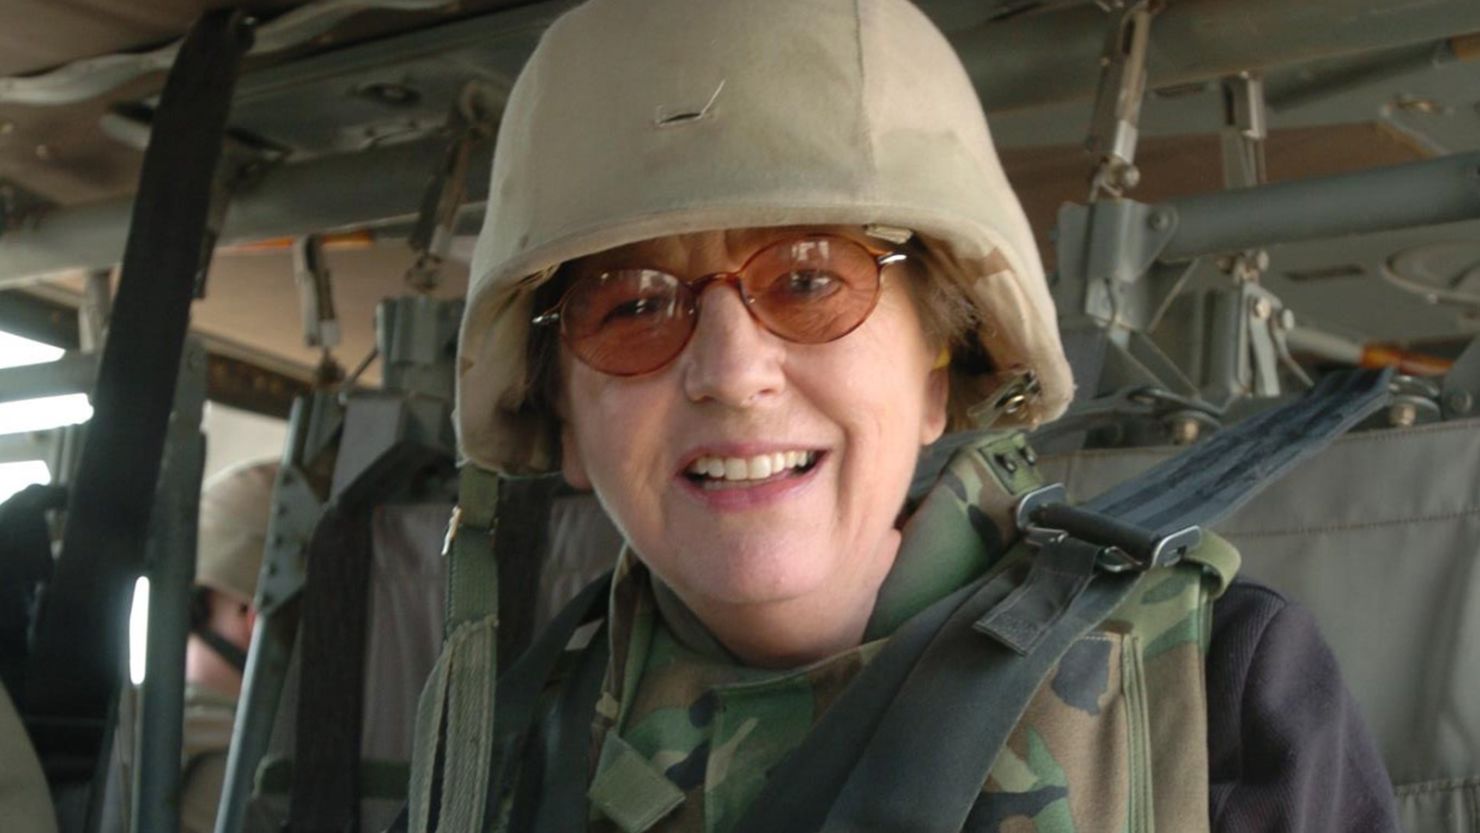 Sandra Mackey spent time with the Army's 1st Infantry Division in Iraq in 2004, teaching about the country.